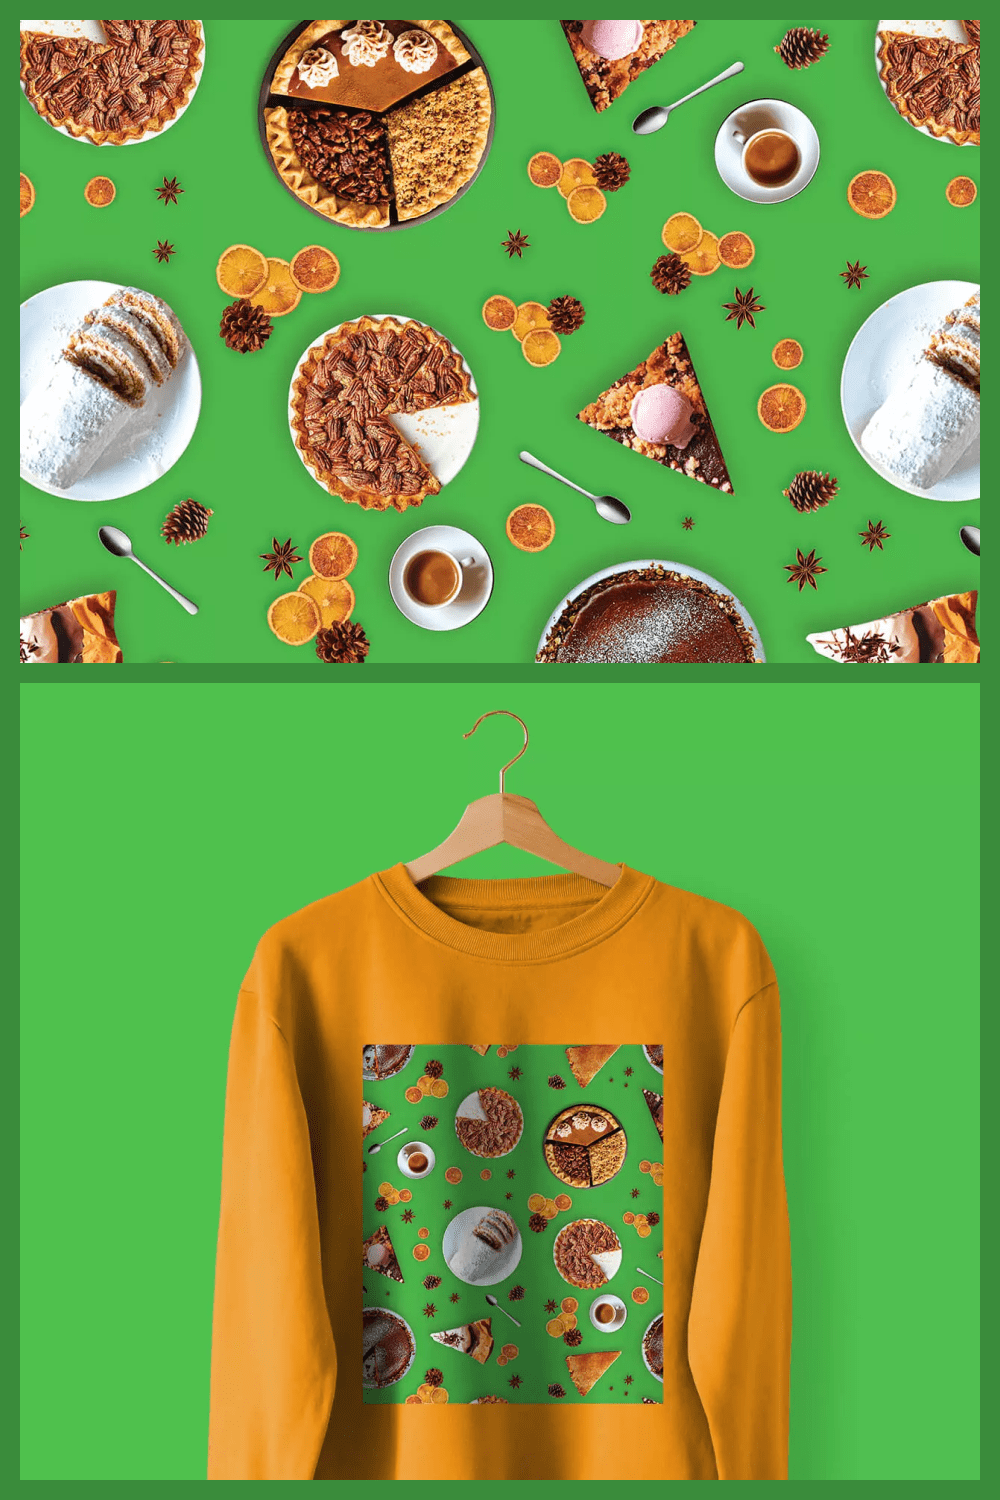 Orange hoodie with green square print with pies and bumps on the chest.